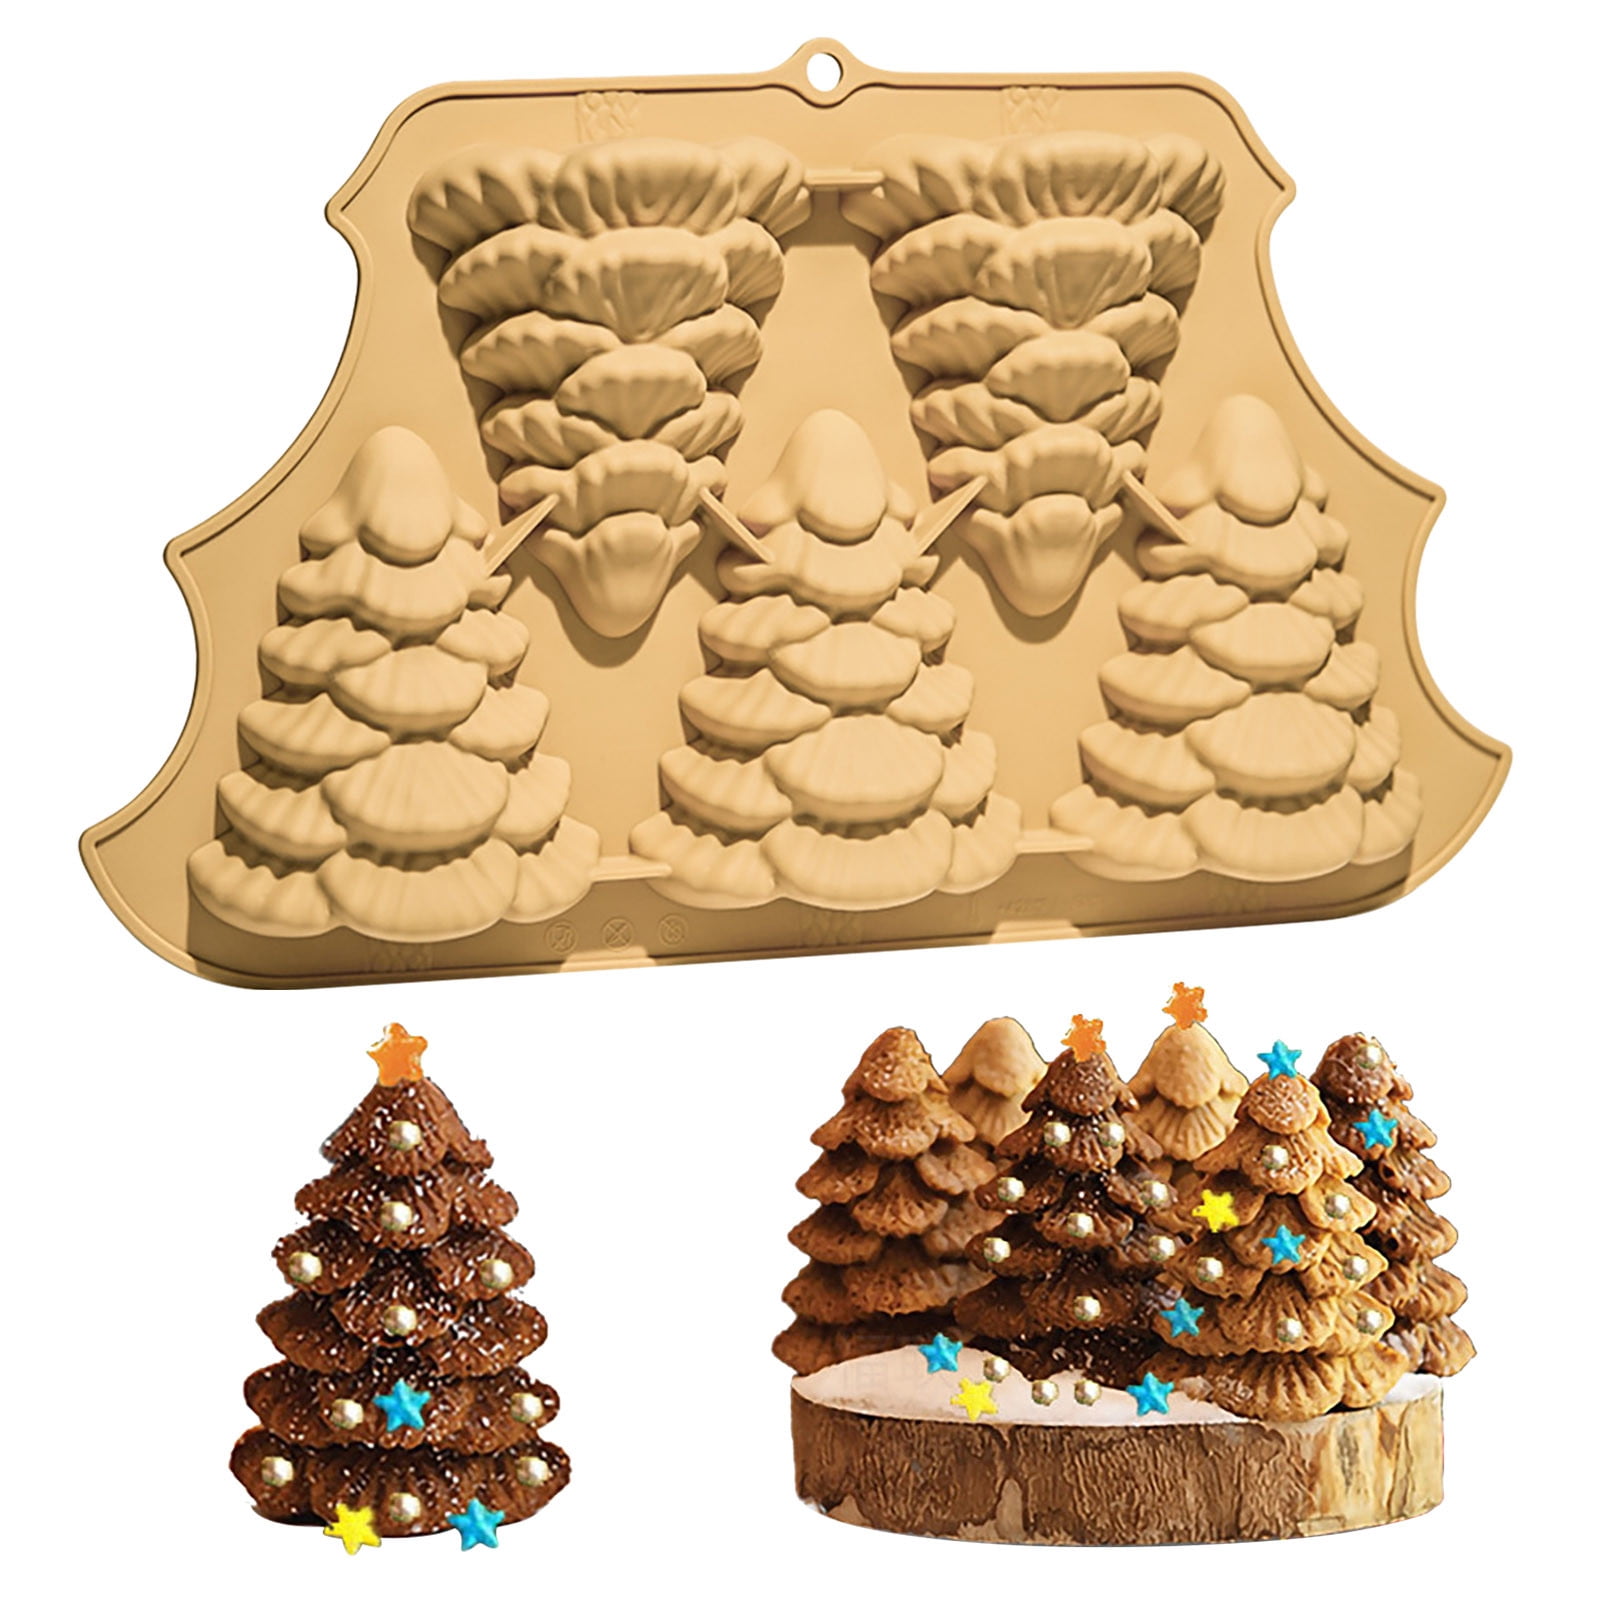  Multi Layered Christmas Tree Silicone Mold, Christmas Tree Cake  Pan 3D Silicone Christmas Baking Molds, Non Stick for Making Hot Chocolate  , Cookie, Cake, bread, Jelly, Pudding for Holiday Parties: Home